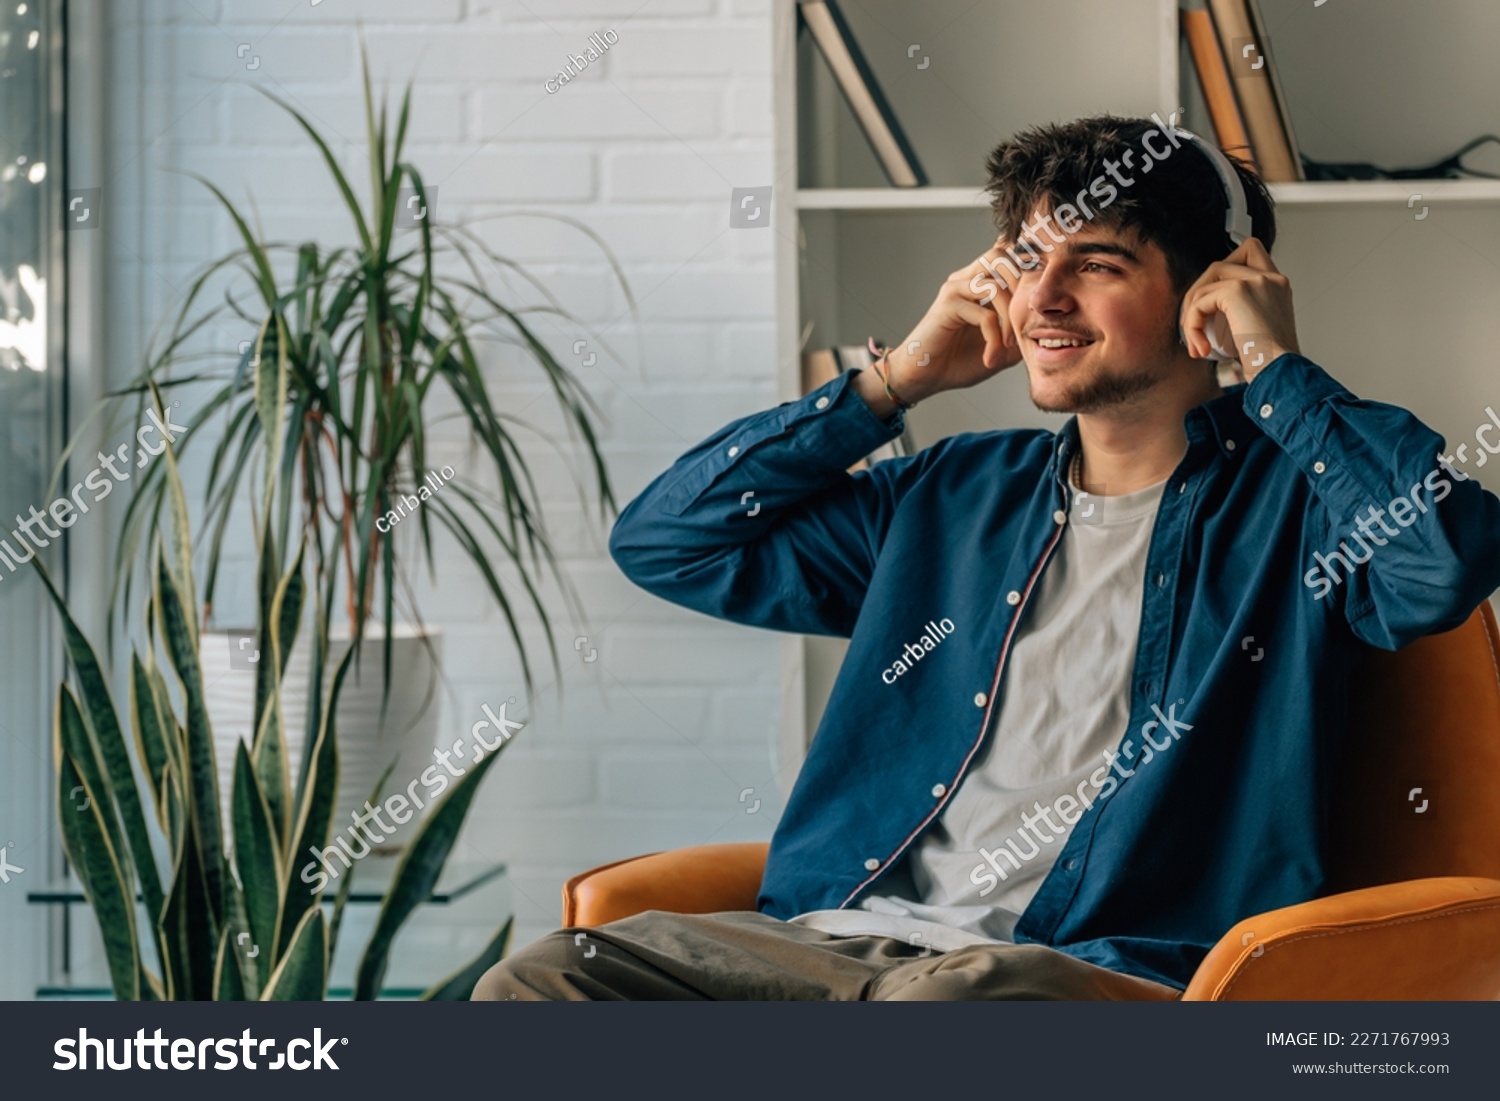 young man at home with headphones